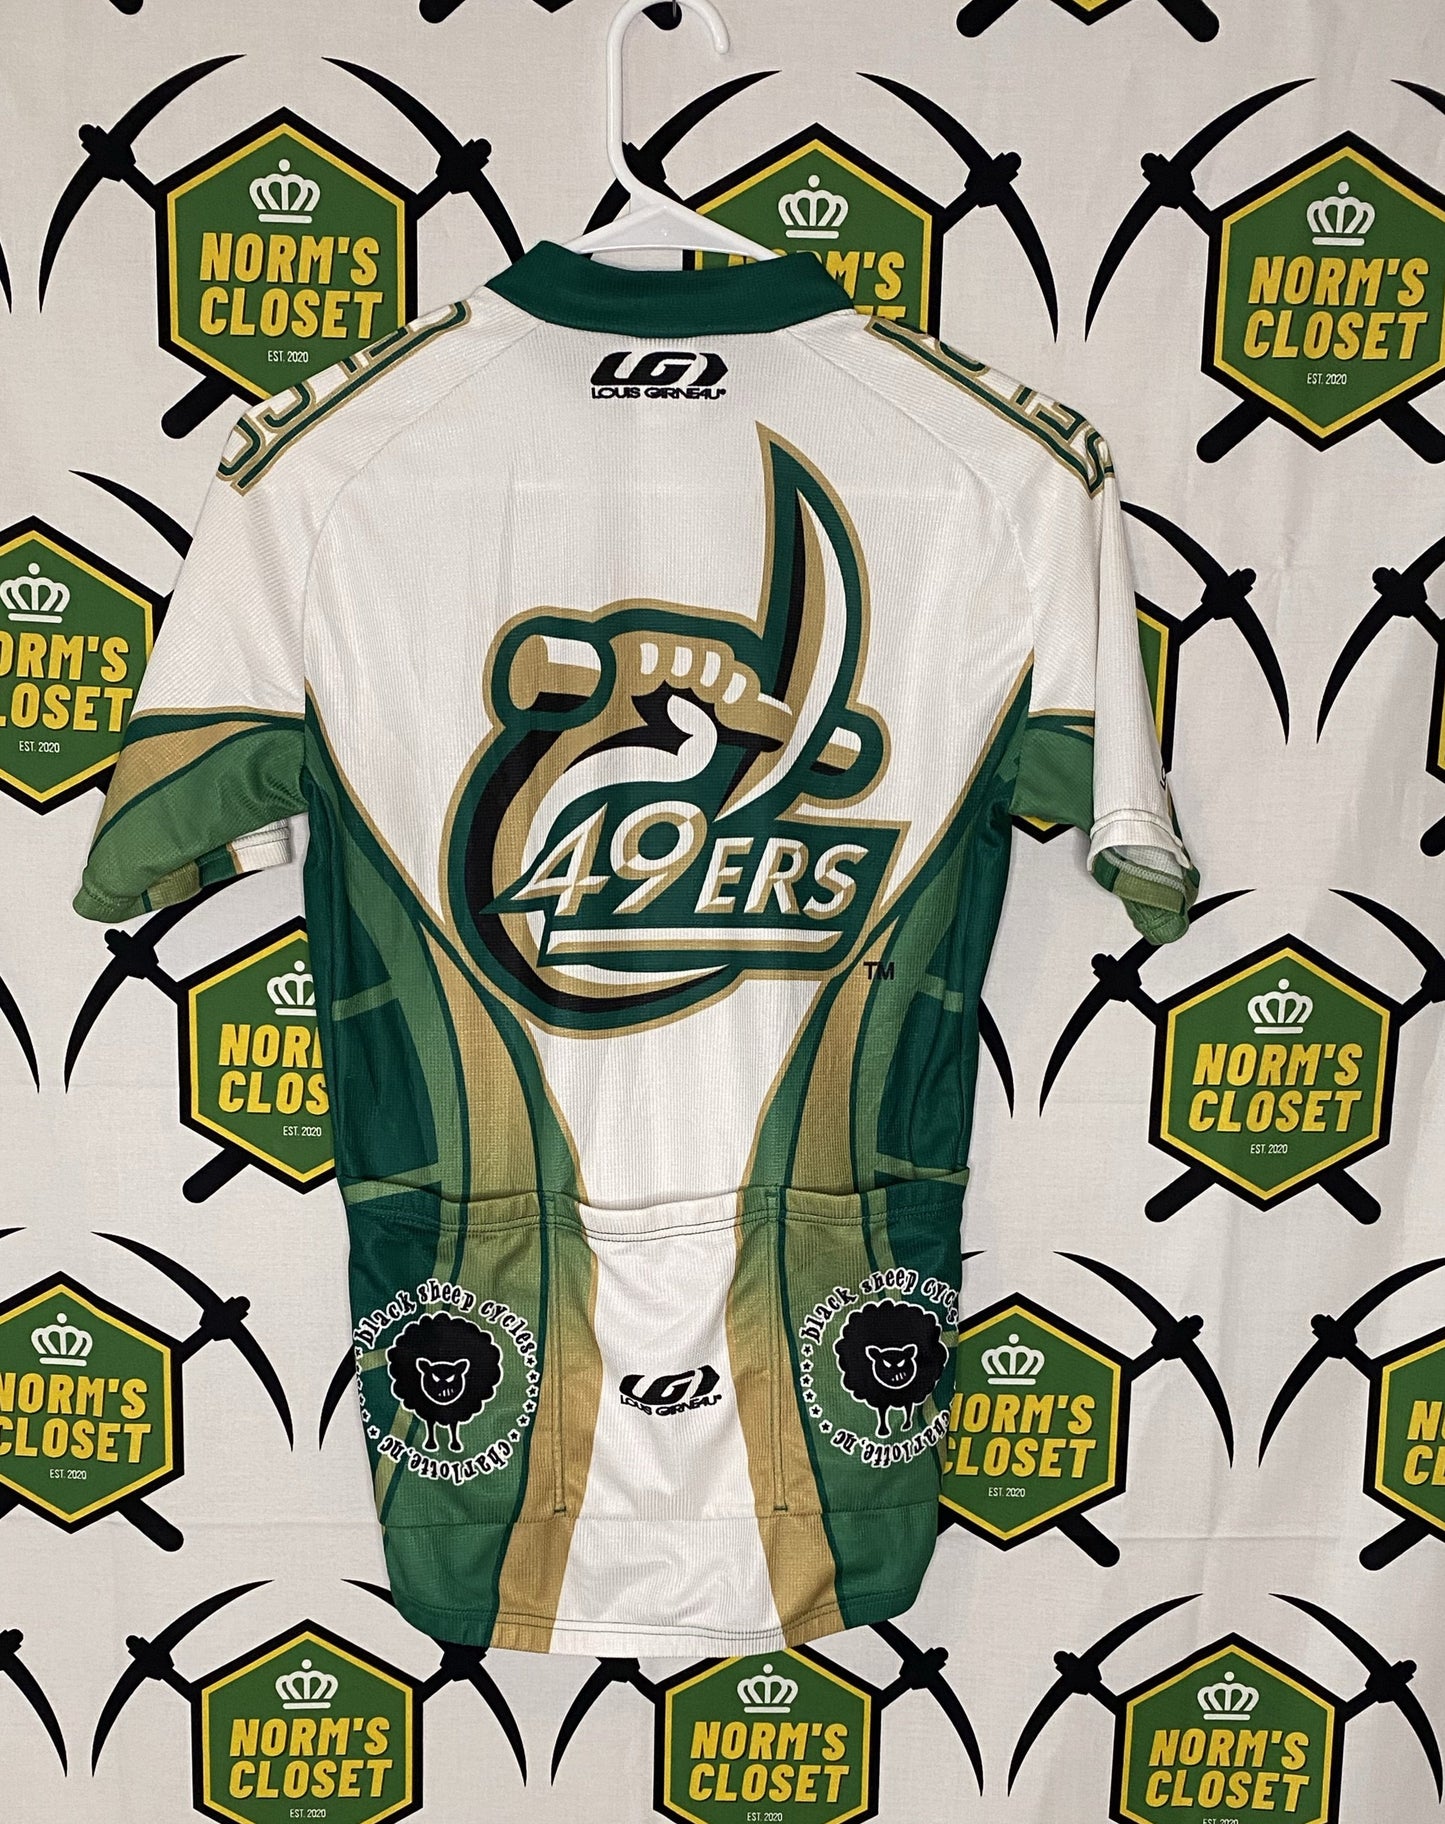 Charlotte 49ers Cyclist Top by Black Sheep Cycles